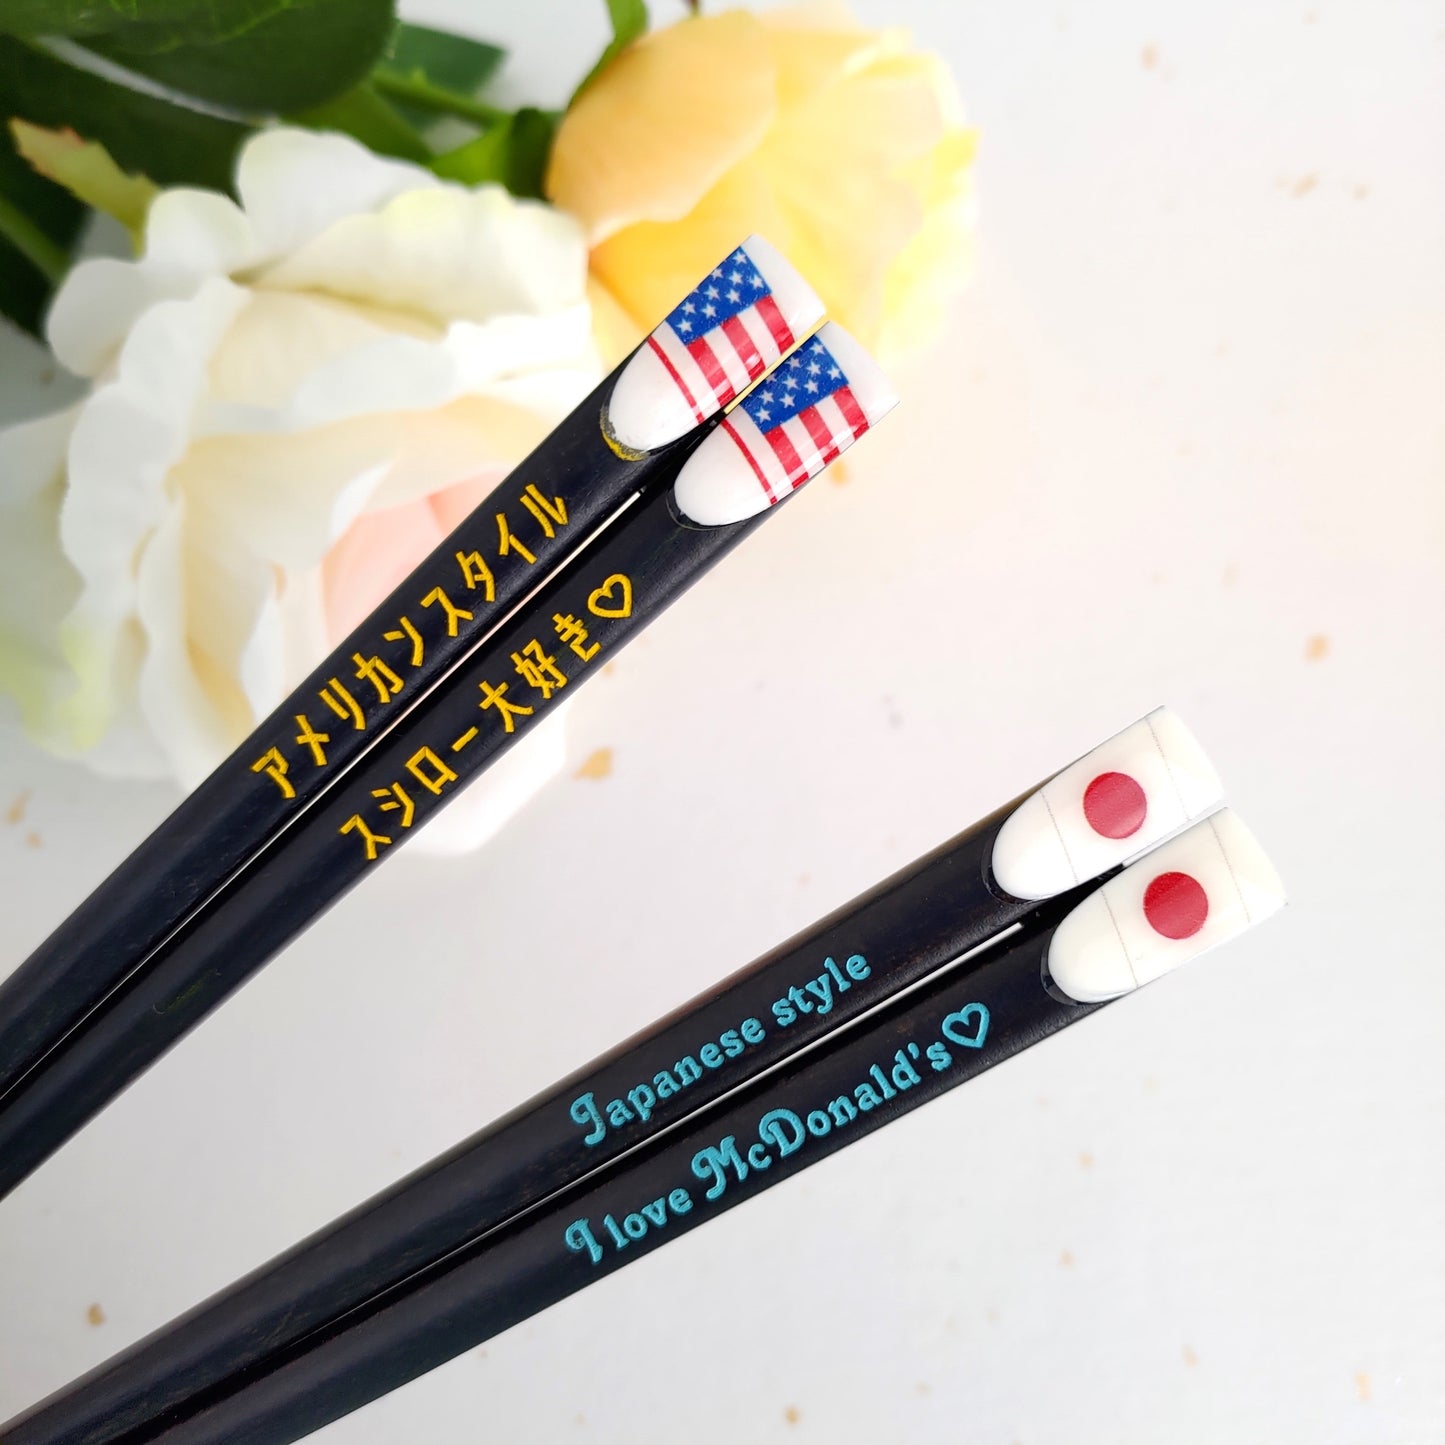 Swell Japanese chopsticks with american and japan flags - SINGLE PAIR WITH ENGRAVED WOODEN BOX SET